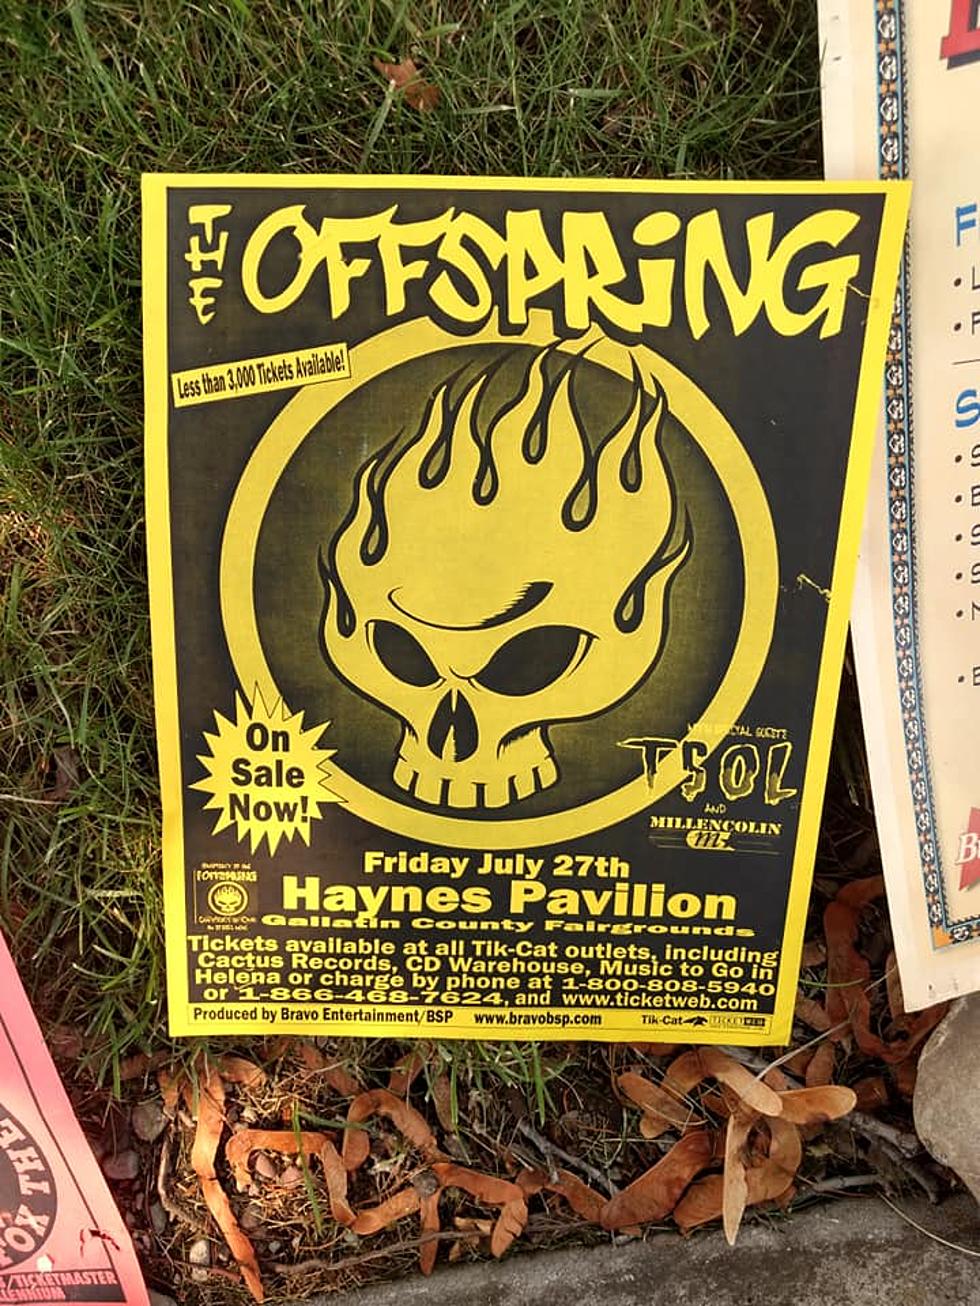 Check Out these Rad Concert Fliers Found in the Trash